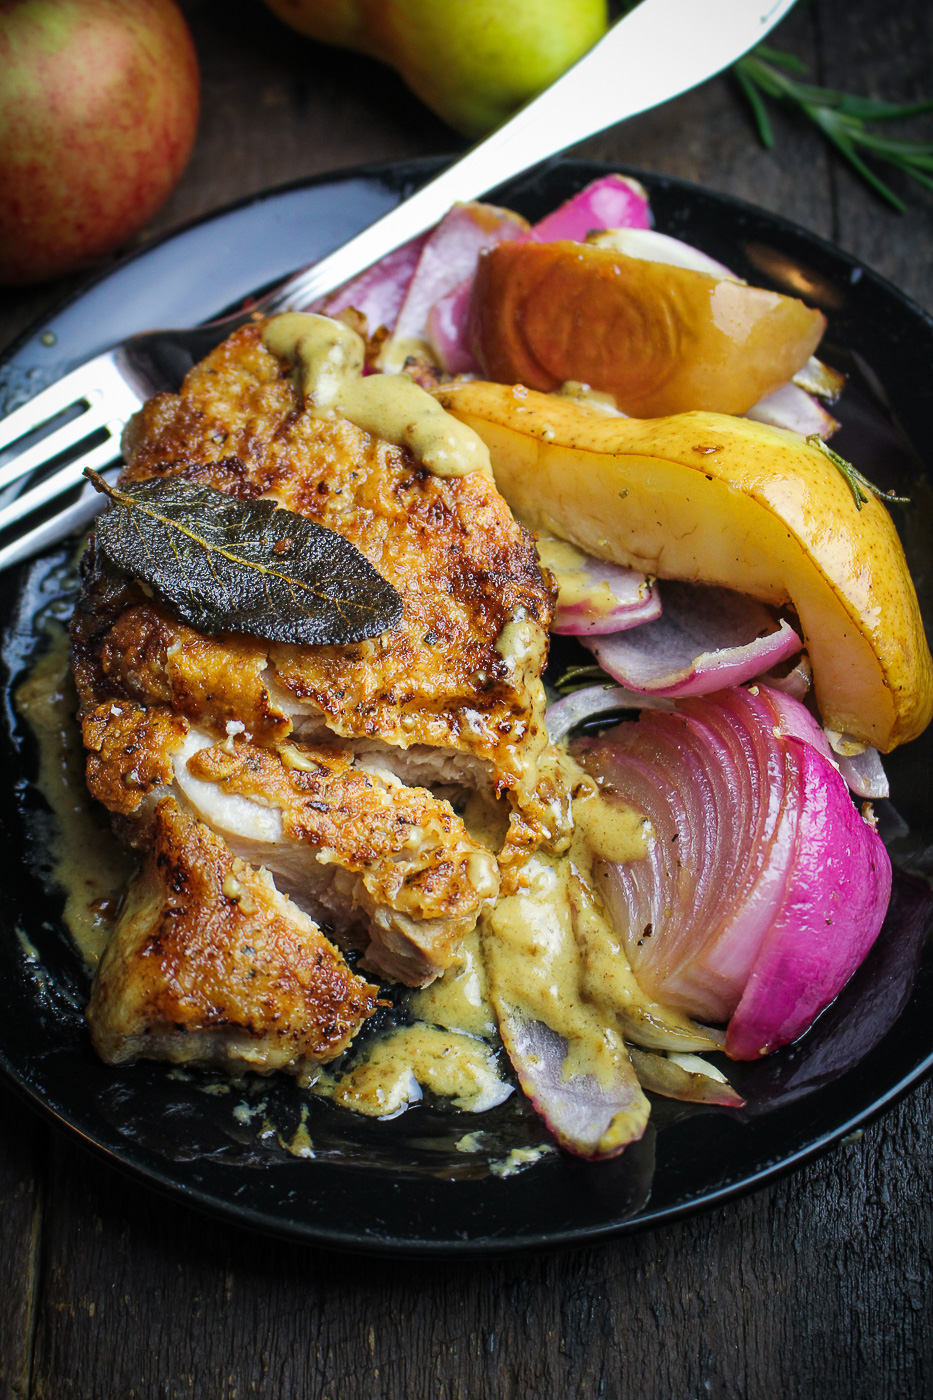 Pan-Fried Pork Chops with Roasted Apples and Pears {Katie at the Kitchen Door}